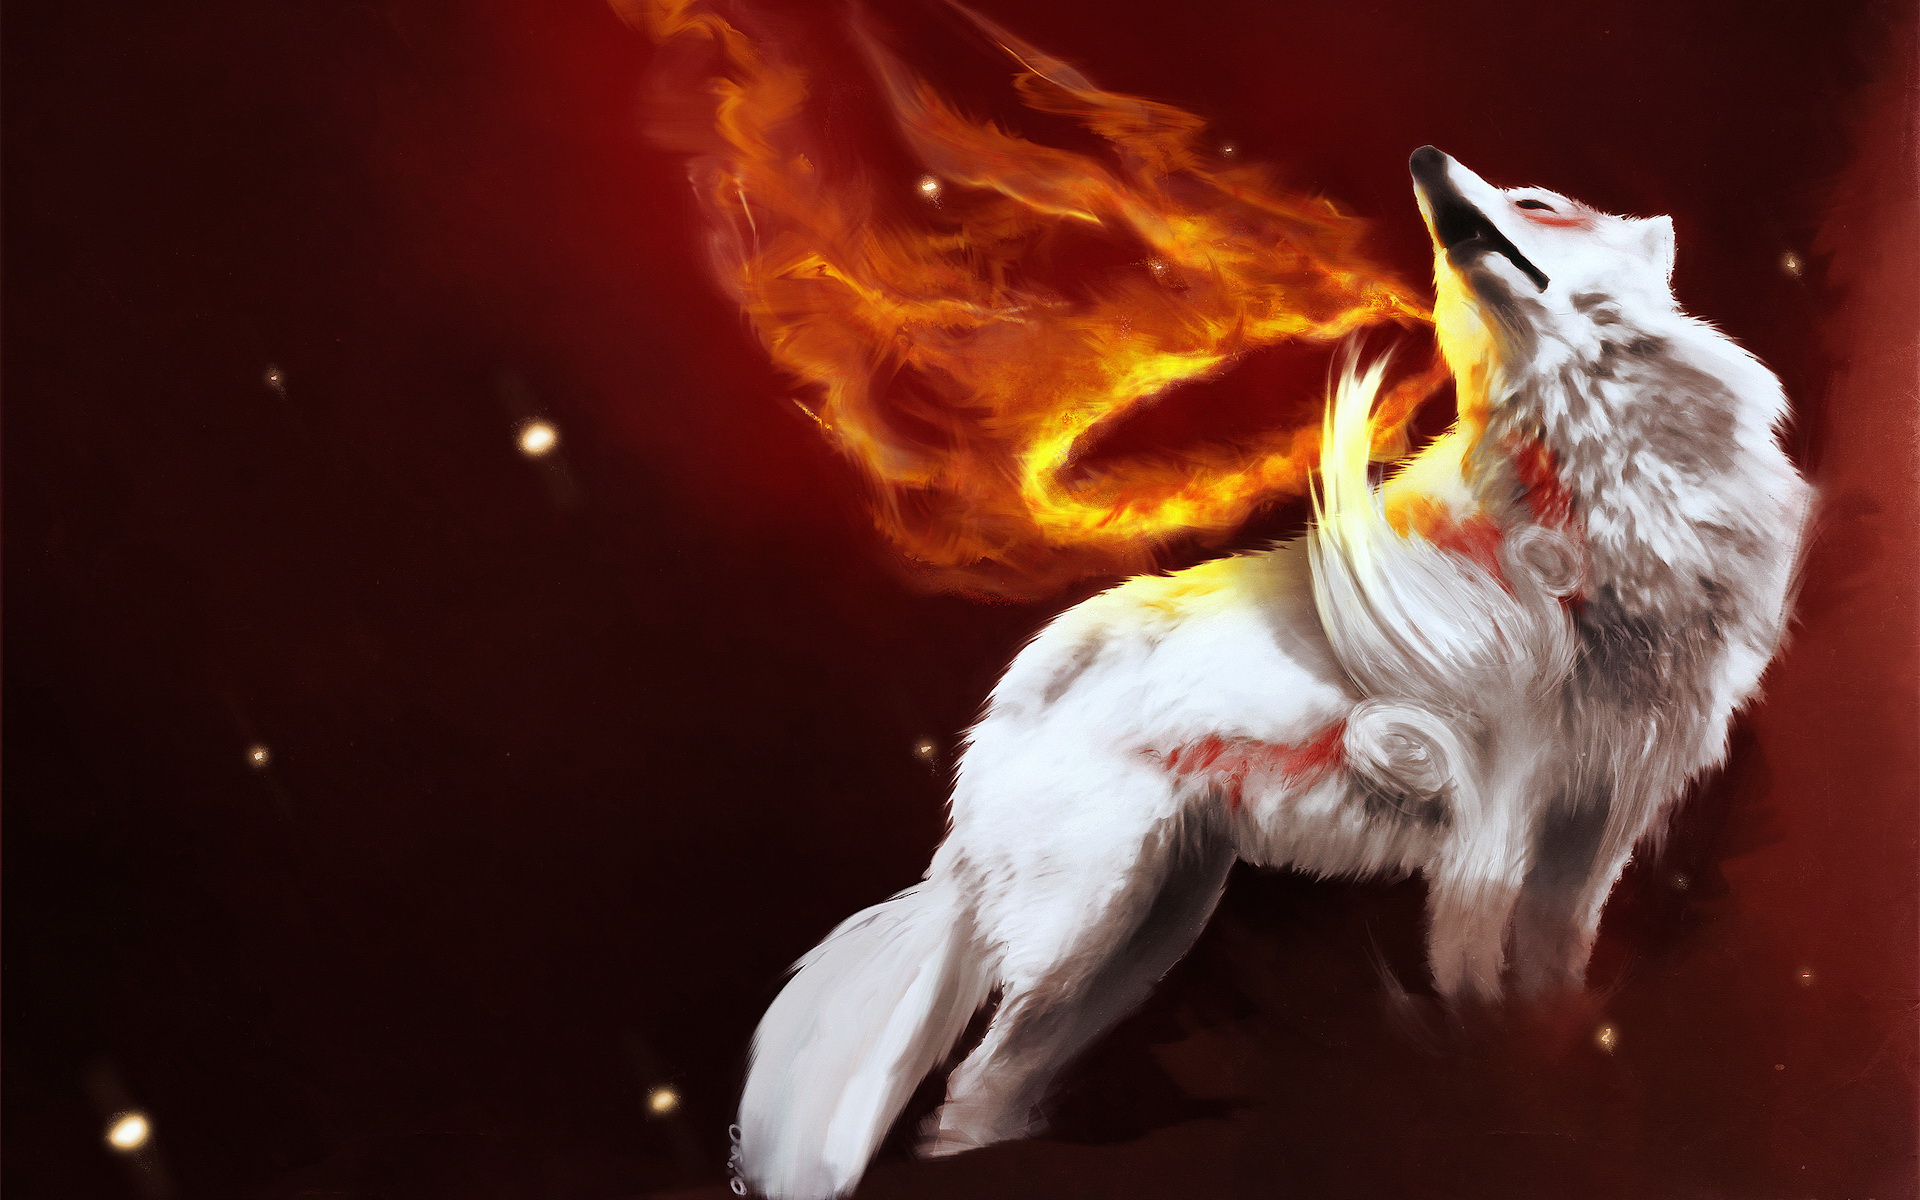 Previous, Drawn wallpapers - Fire wolf wallpaper